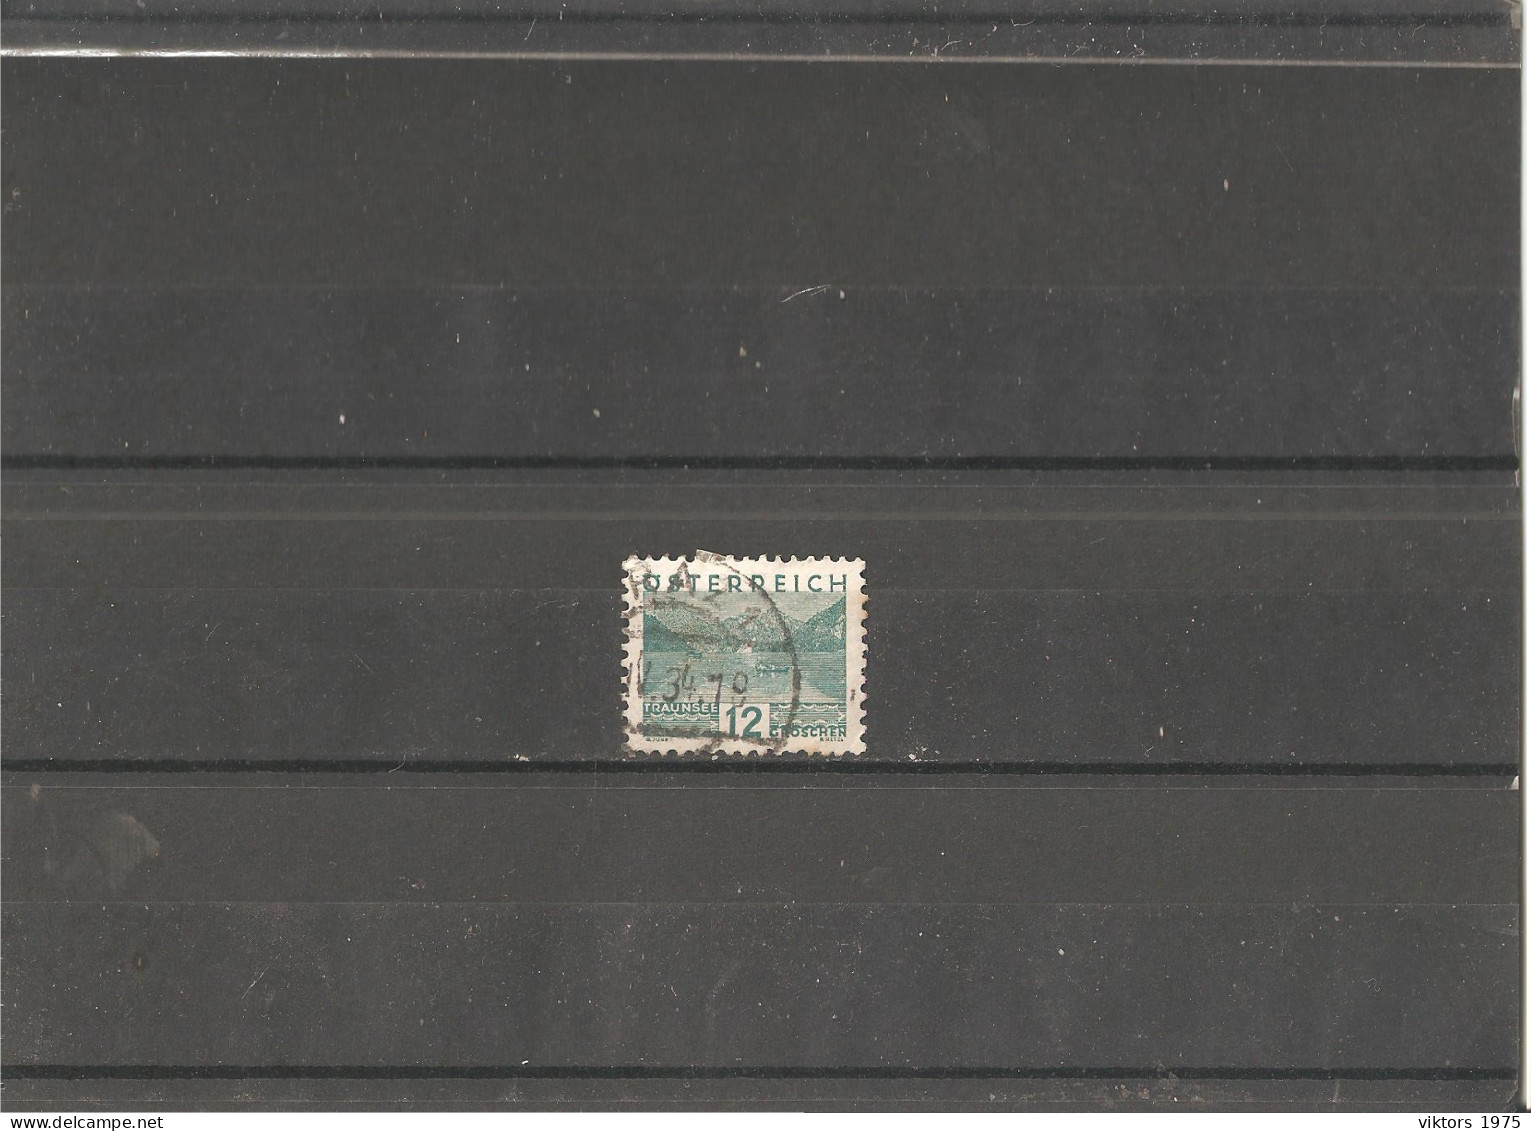 Used Stamp Nr.531 In MICHEL Catalog - Used Stamps